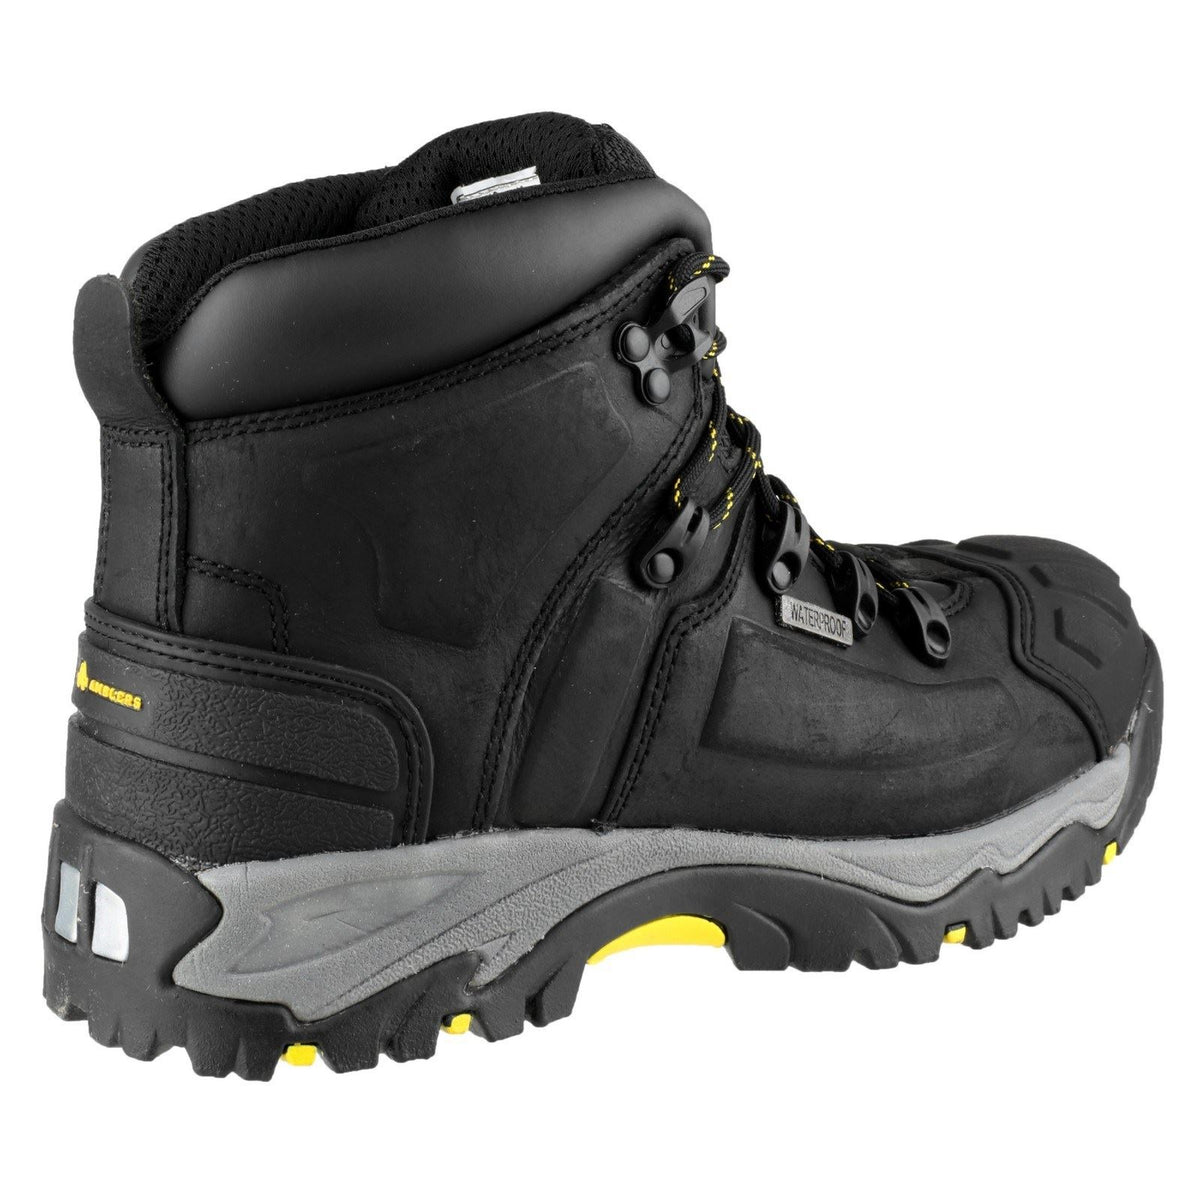 Amblers Safety FS32 Waterproof Safety Boots